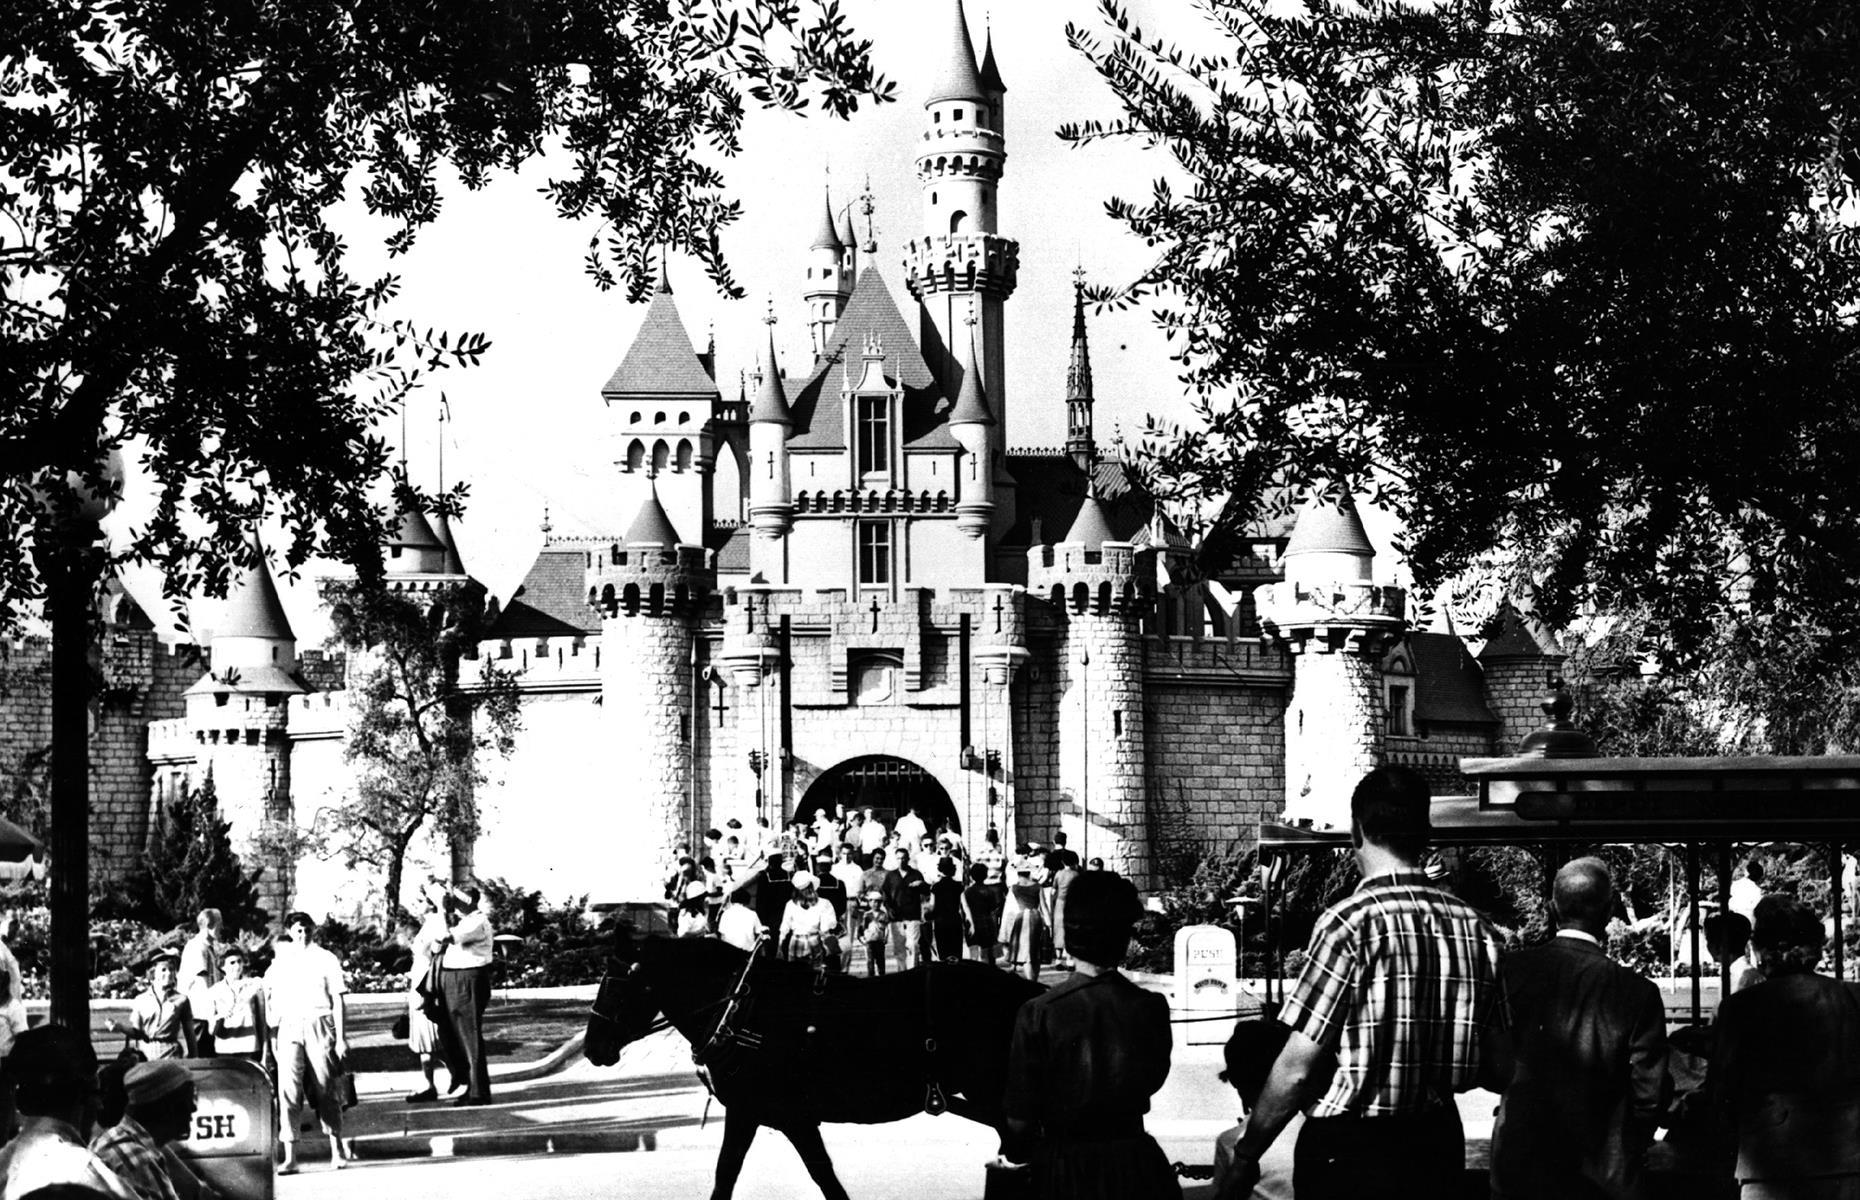 Slide 19 of 38: Of course, of all the weird and wonderful sights at Disney's parks, Sleeping Beauty remained – and remains – the most enduring icon. Disney's design was modeled on Neuschwanstein Castle, a fairy-tale fortress in Germany's Bavaria region, and the palace is pictured here still surrounded by tourists in the 1960s. Love this? Now check out more vintage photos of America's most historic attractions.